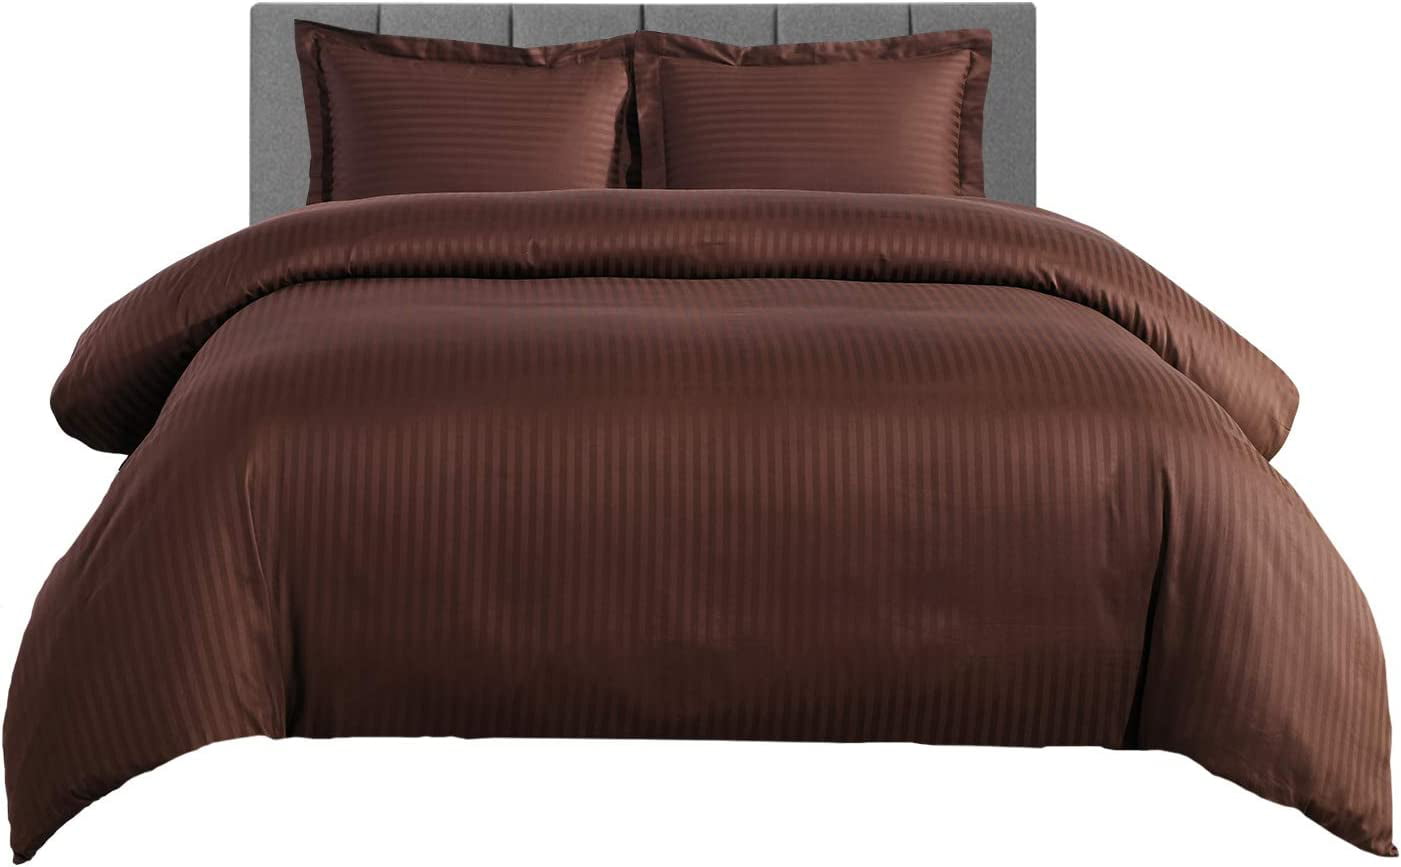 Details about   Cushy Bedding Collection 1000TC Egyptian Cotton US Twin XL Size Striped Colors 